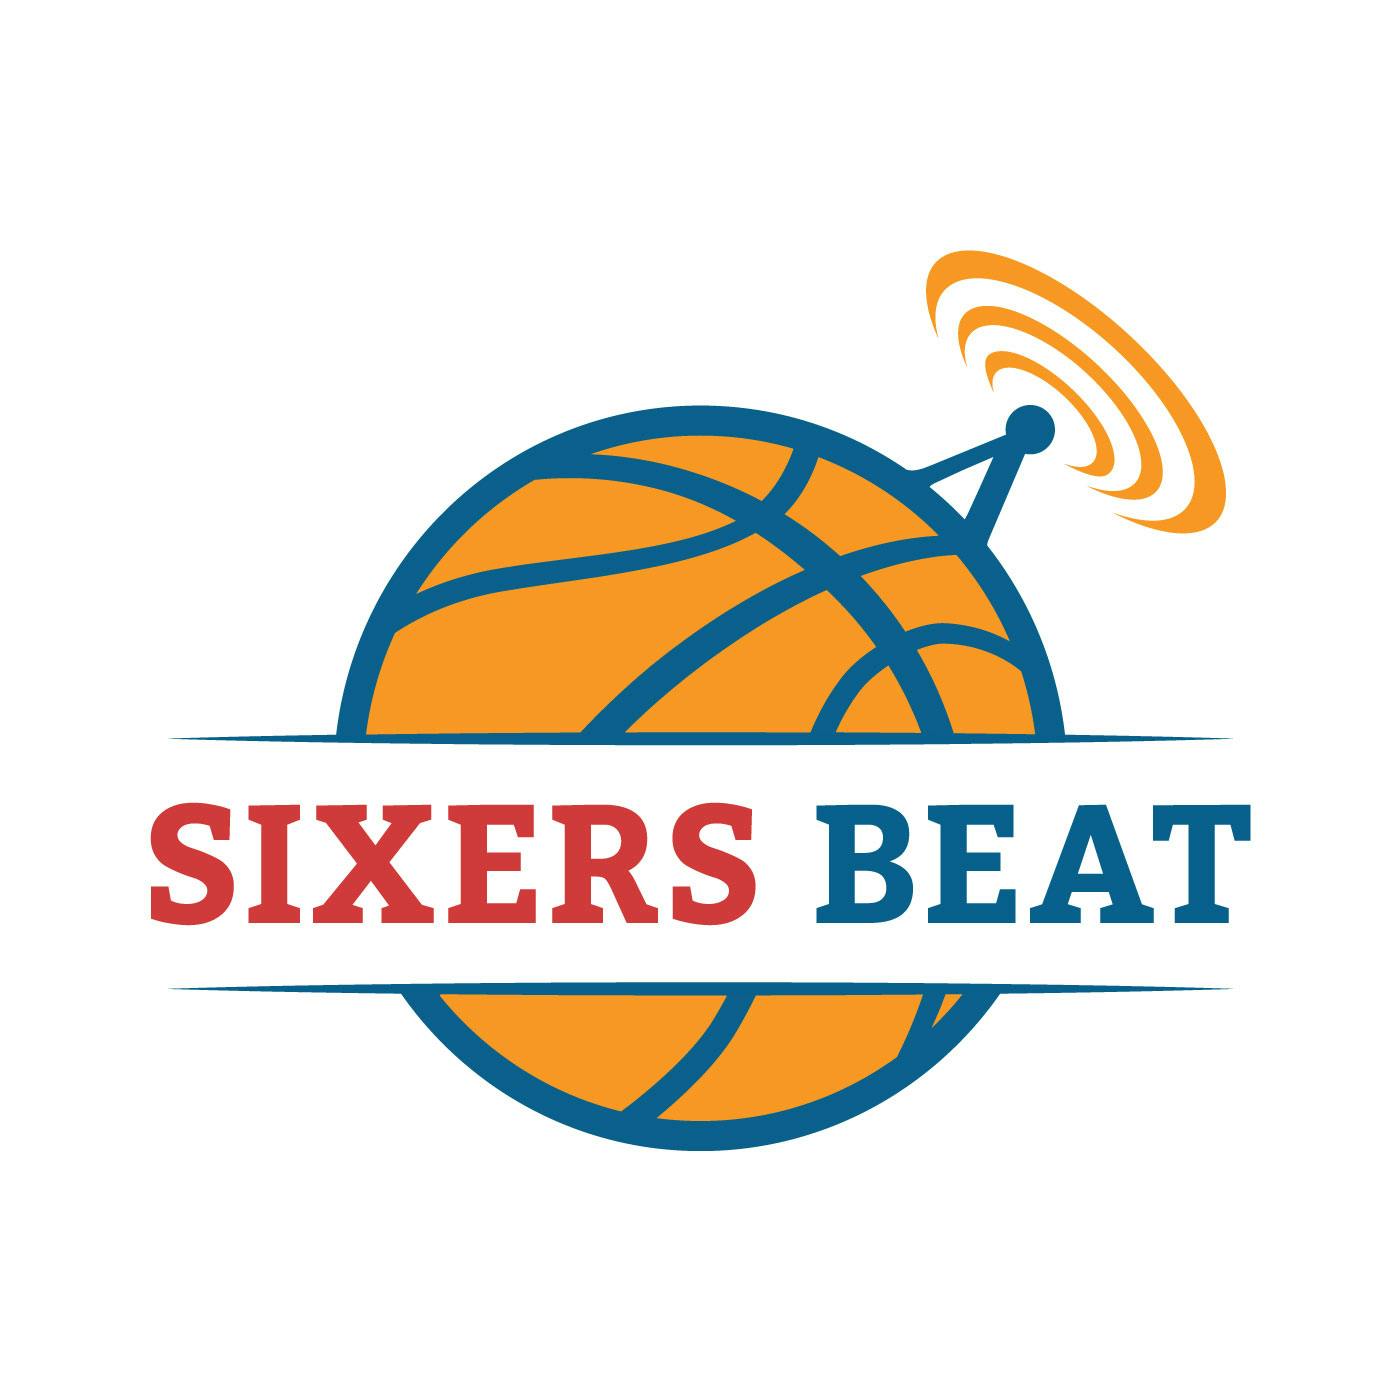 The Very Good, but Perpetually Frustrating, 76ers